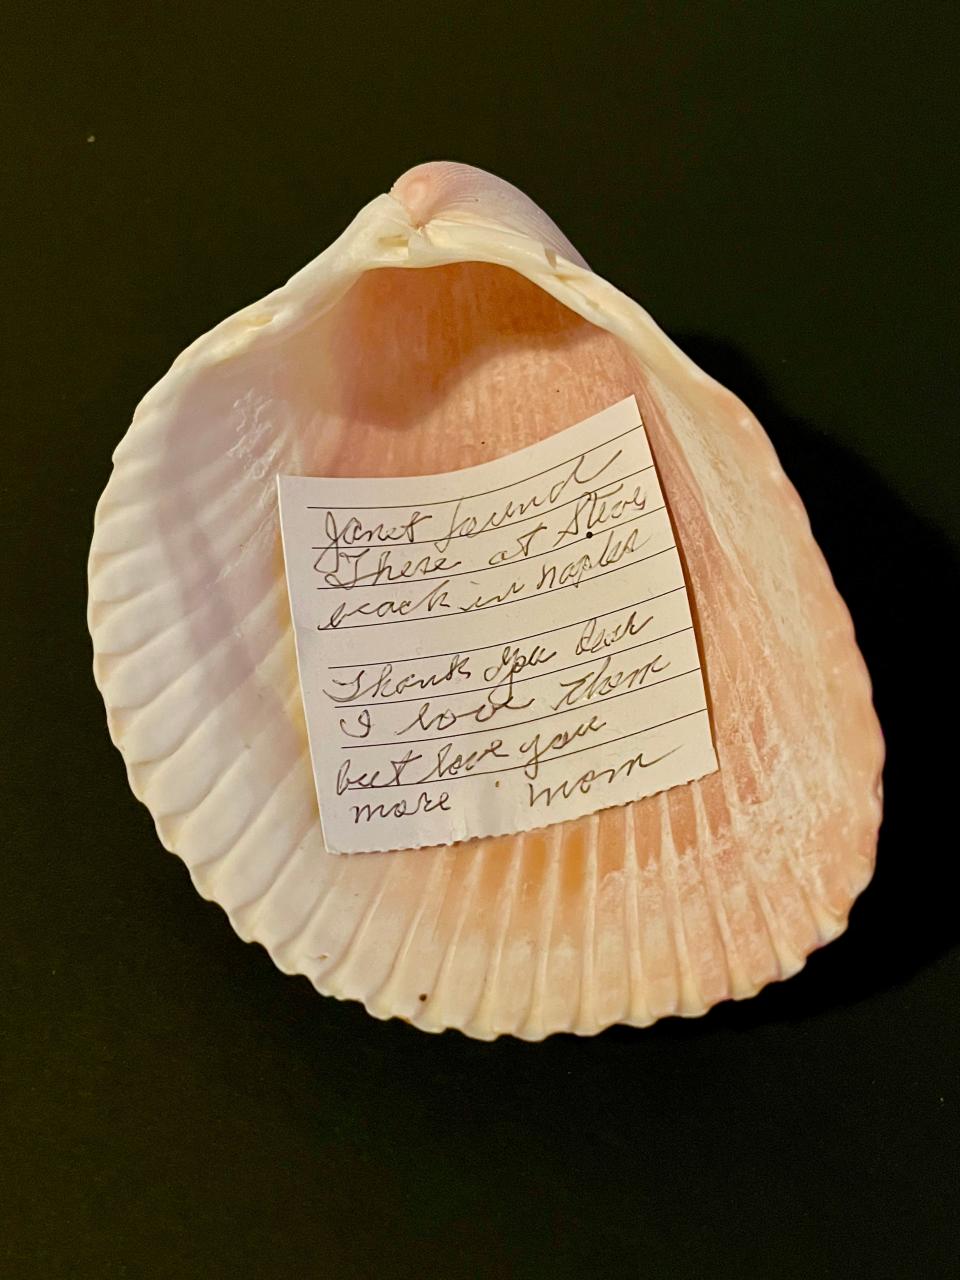 A note the author's mother left for her in a seashell.